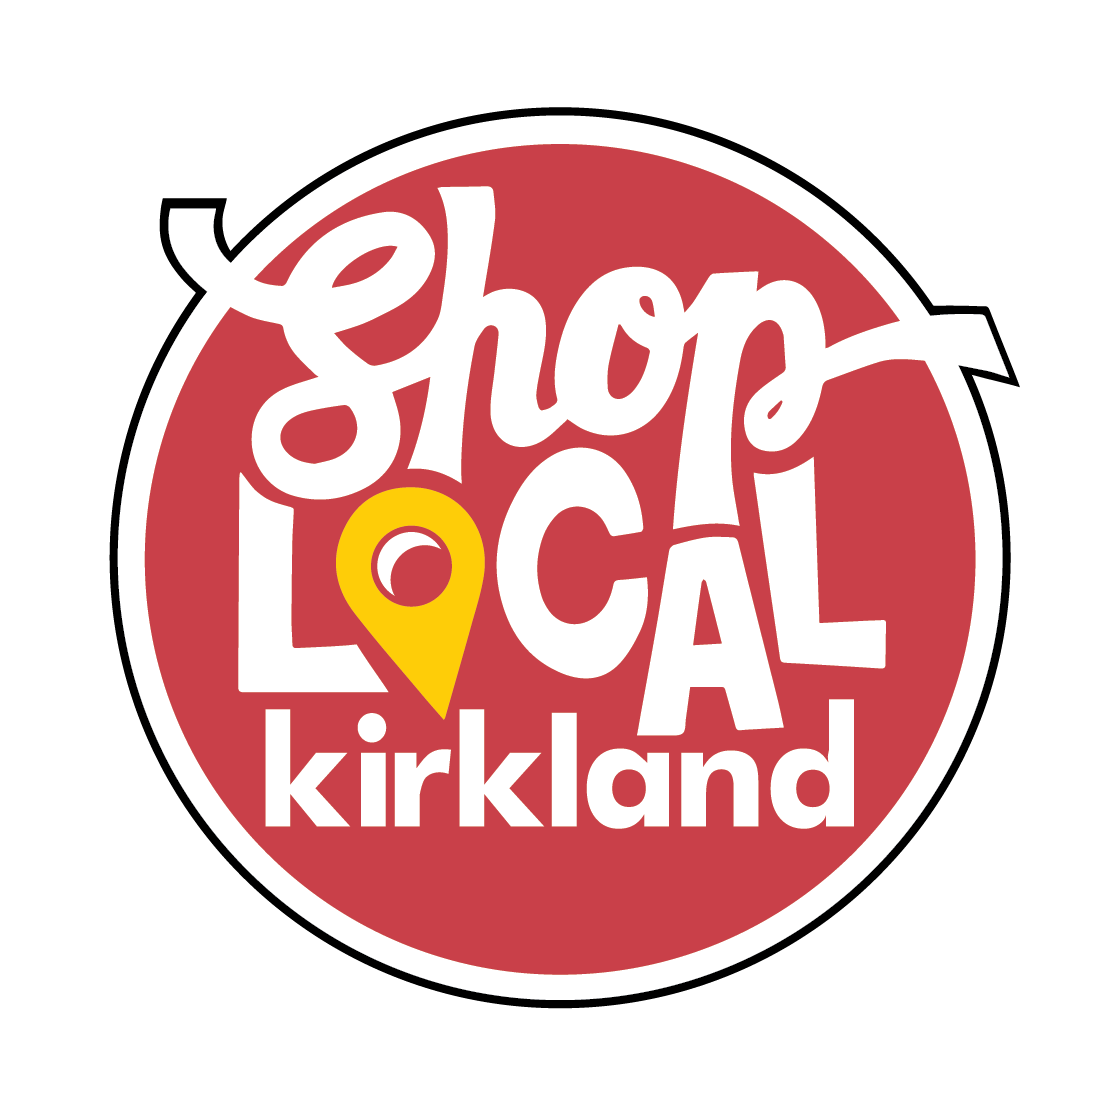 Round Shop Local Kirkland logo with red background and yellow pin